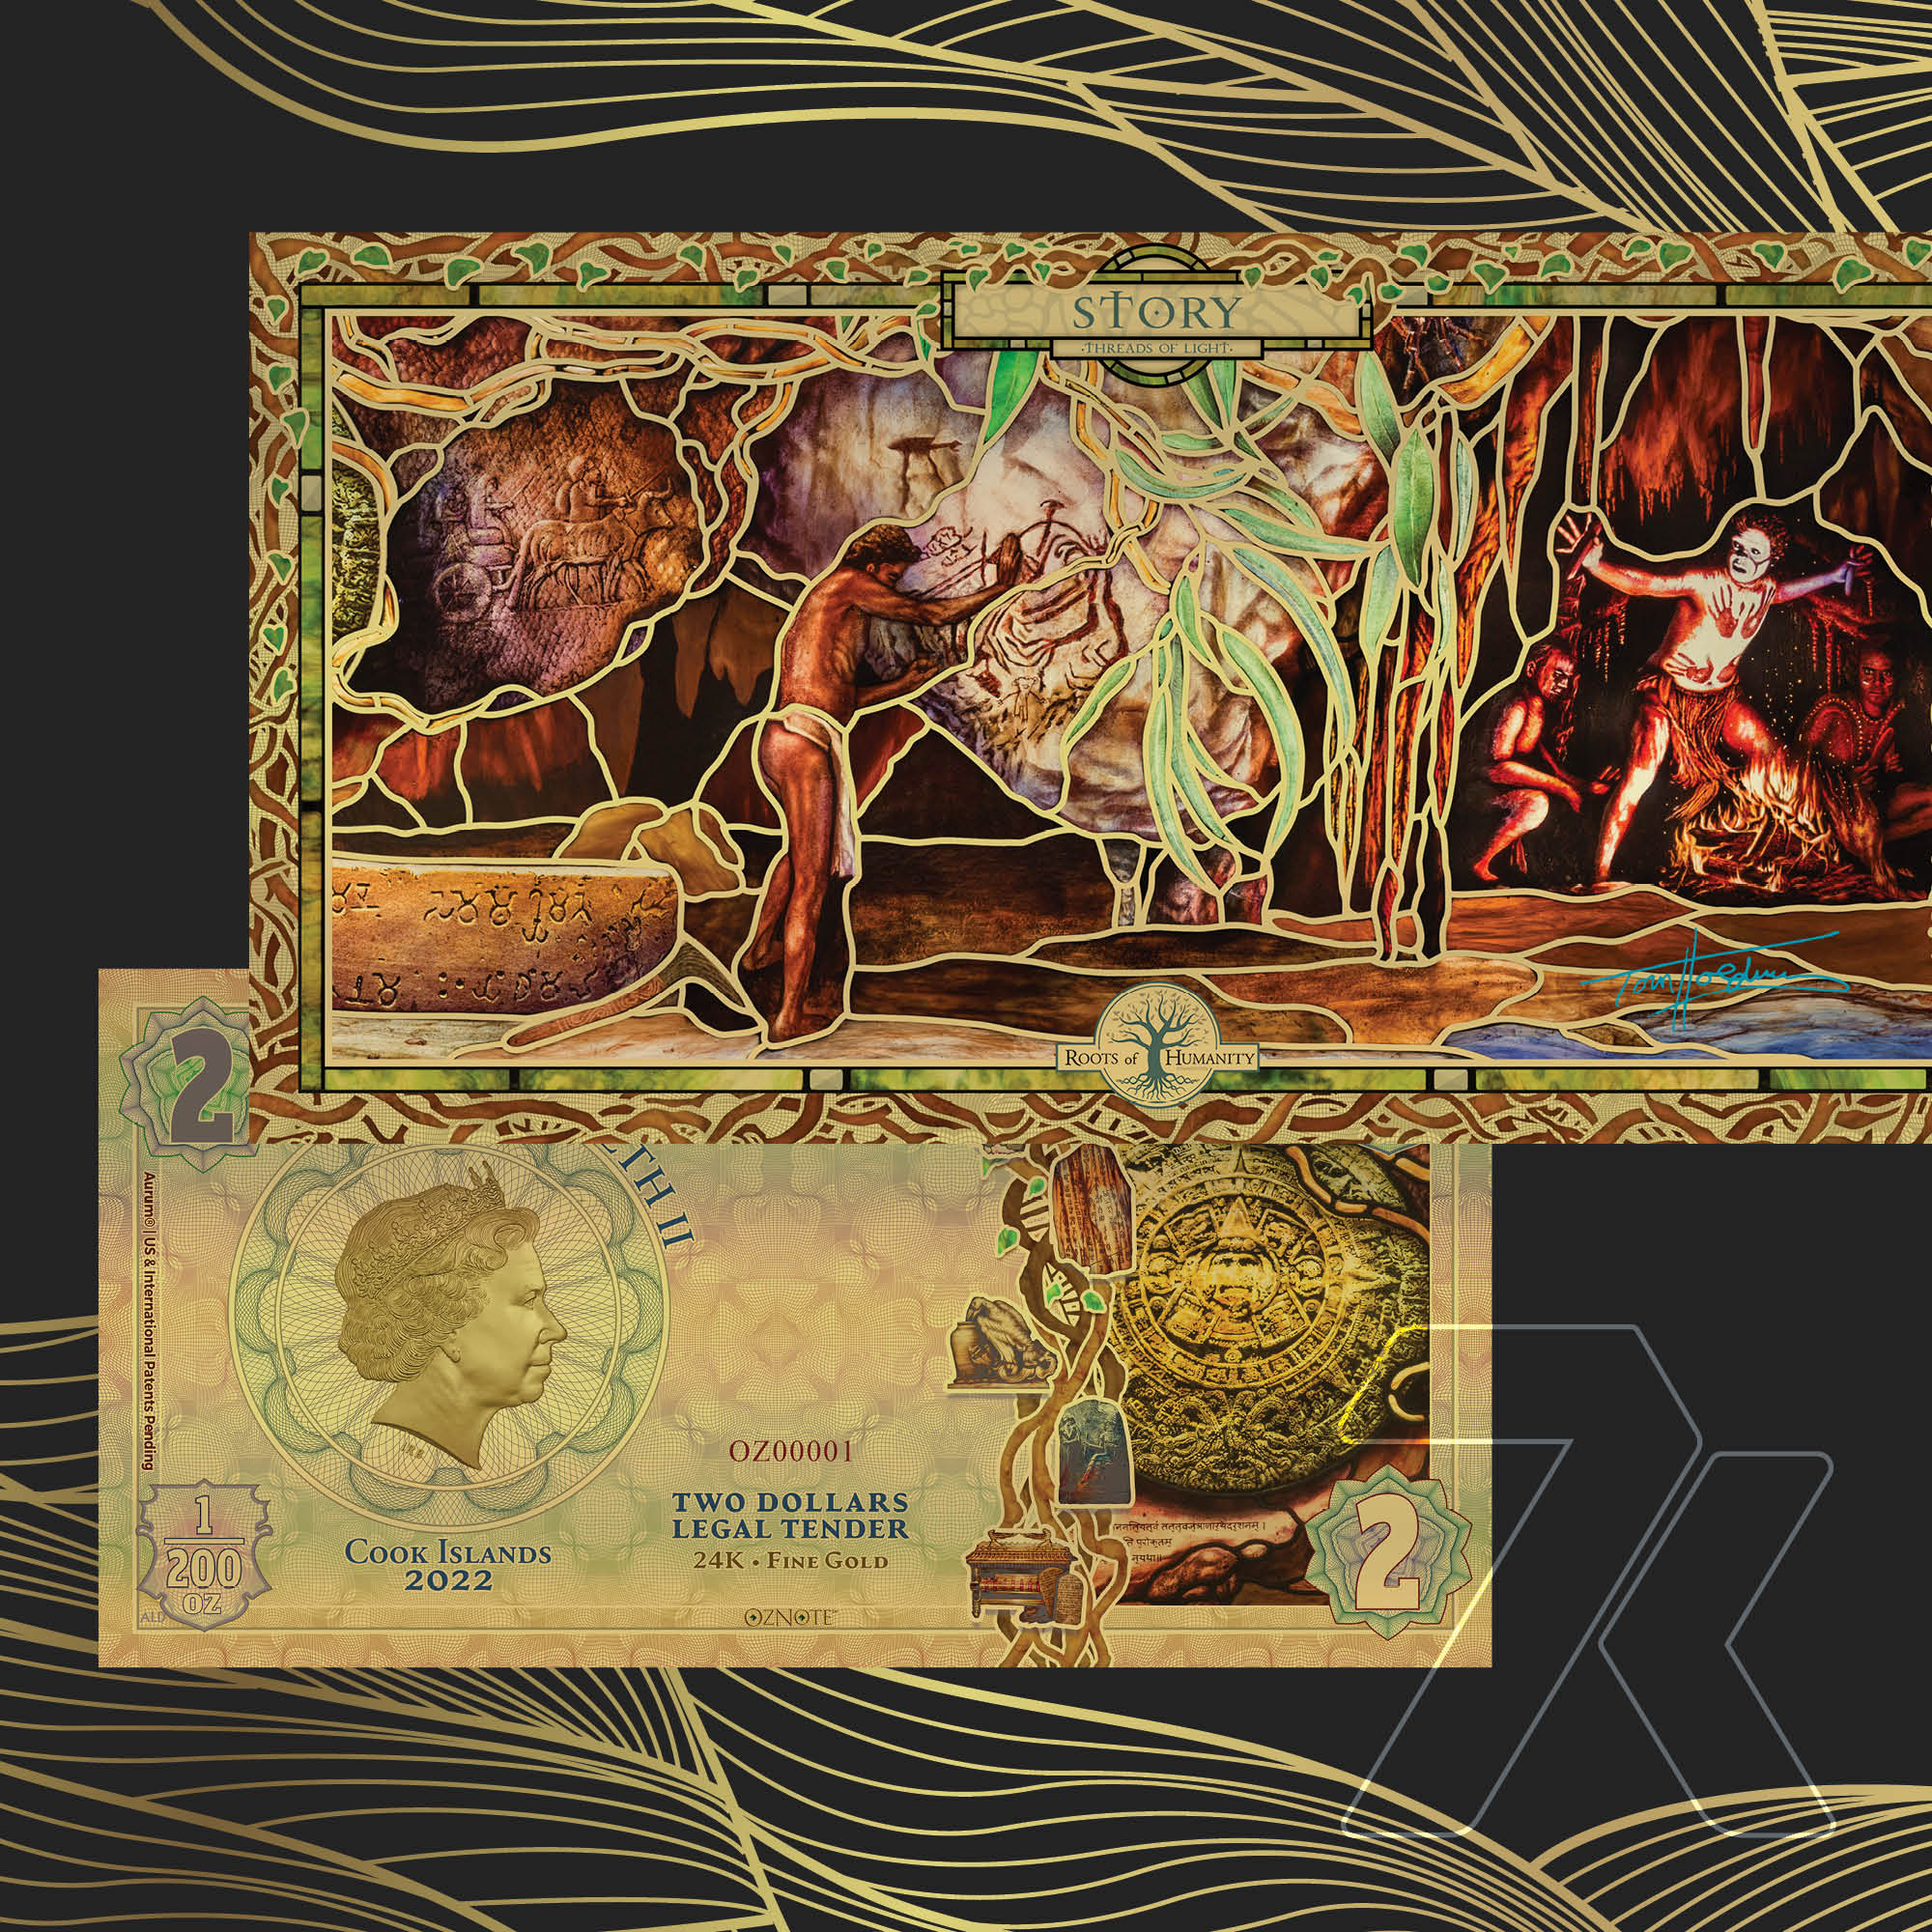 2022 Threads of Light Story 1/200th oz Gold Note